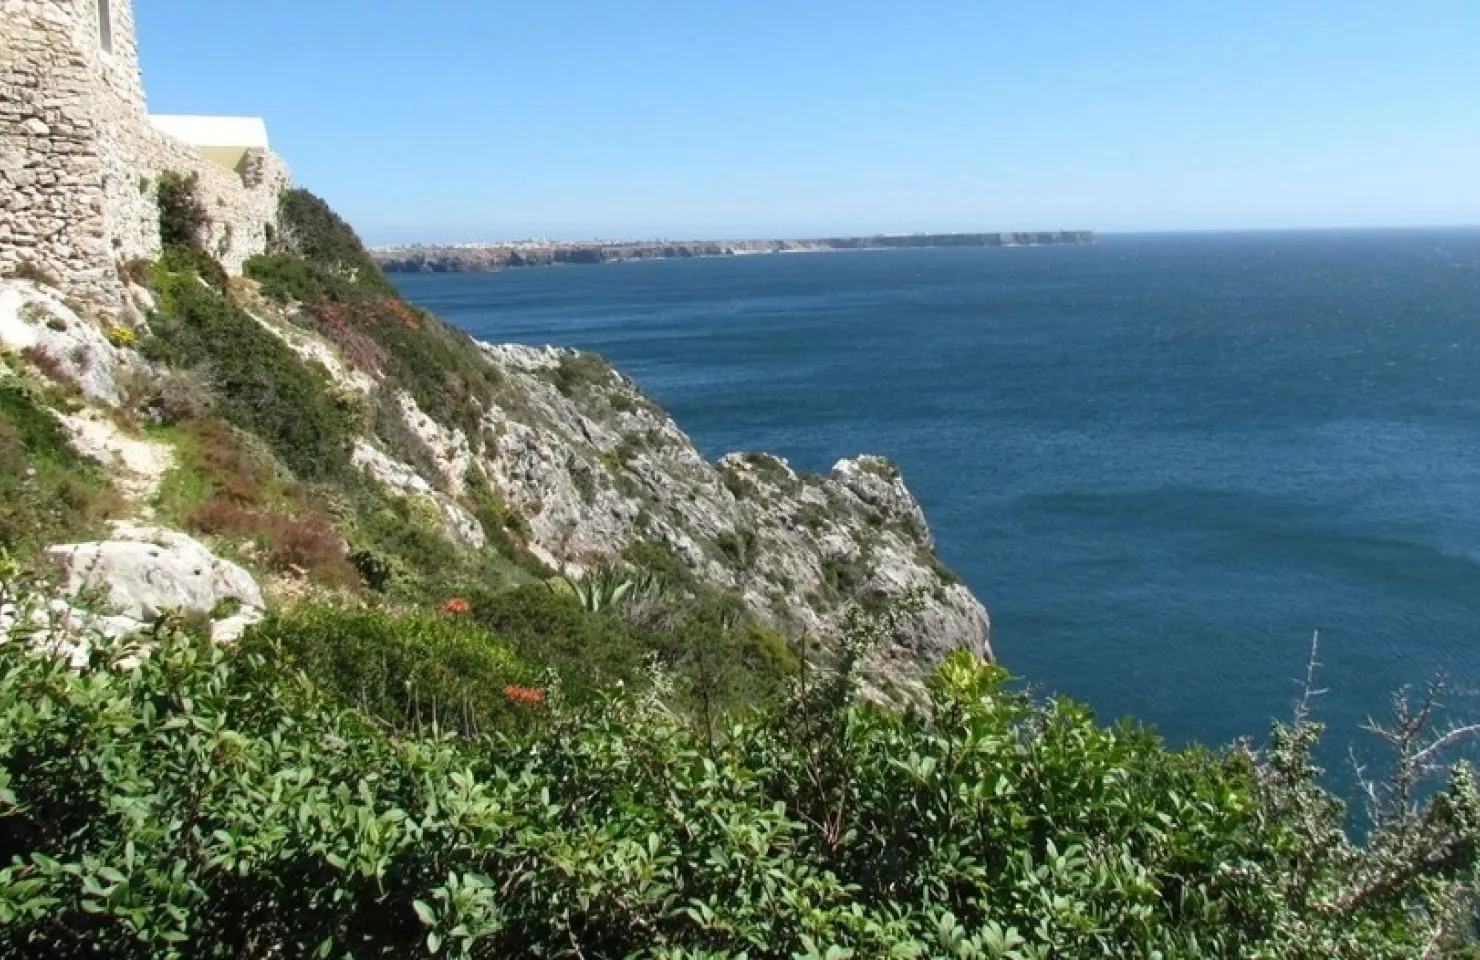  Rocha Life Birdwatching Expedition - Algarve Natural Escapes